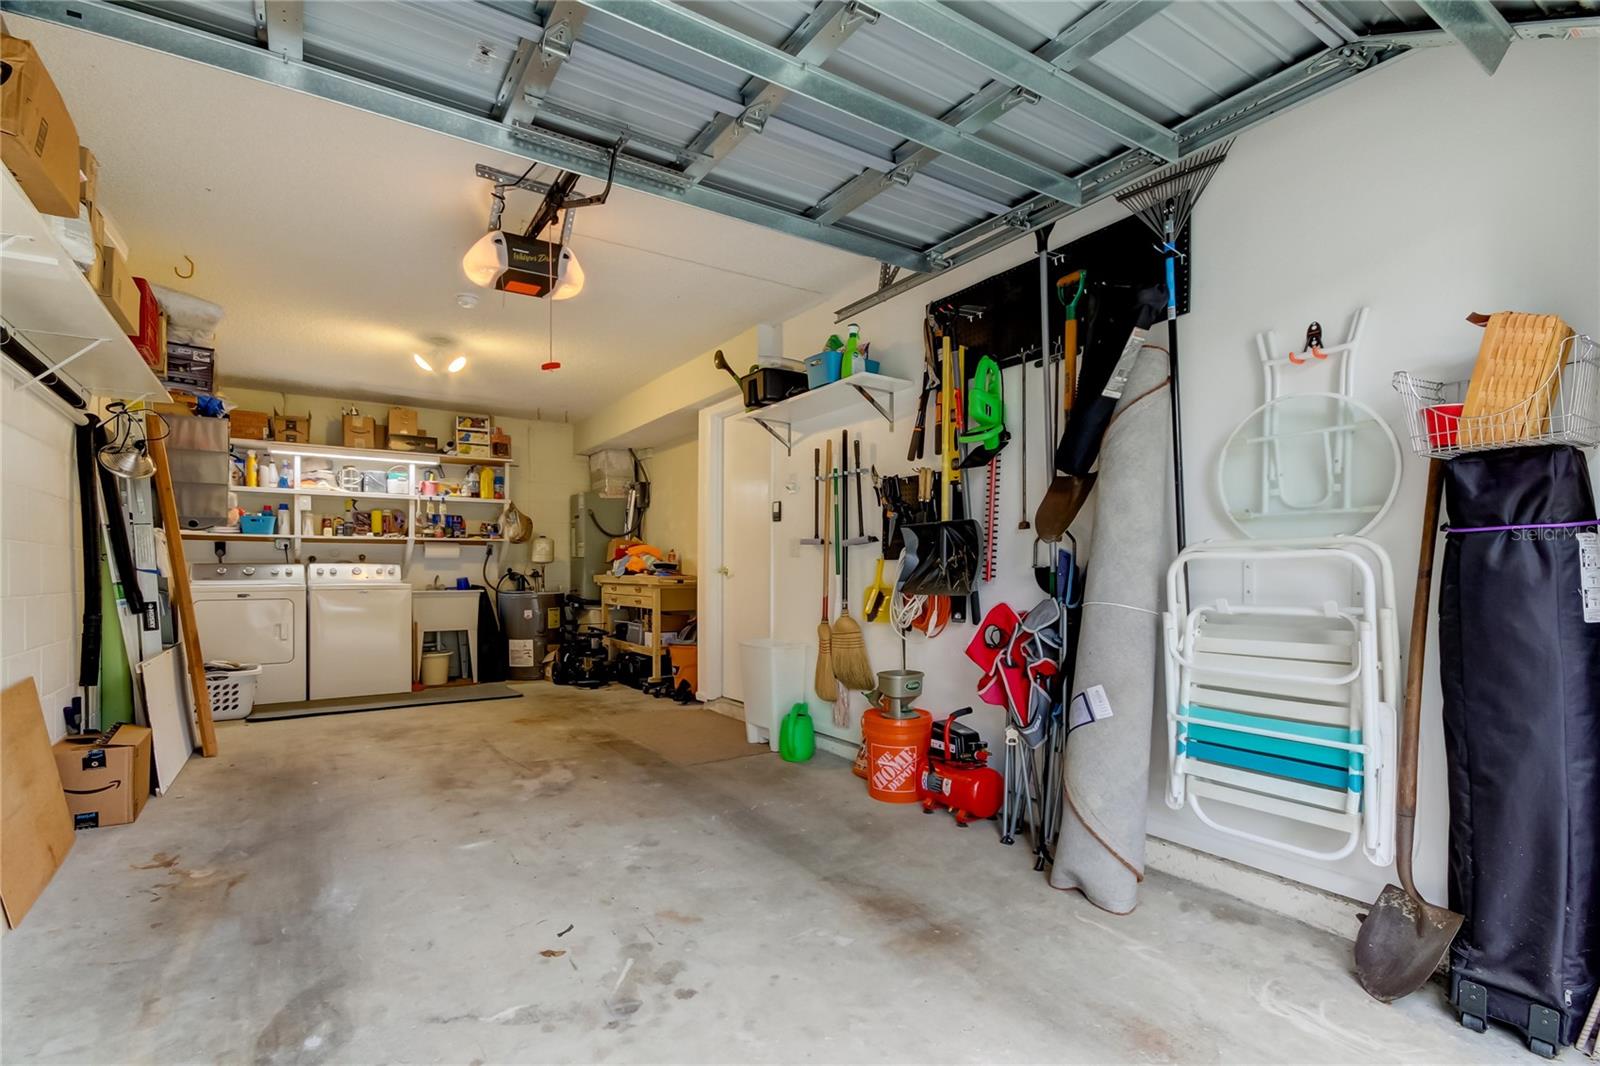 Oversized Garage (10.7' x 24.6')  is Neatly Organized.. Hopefully You Can Keep it That Way, lol!